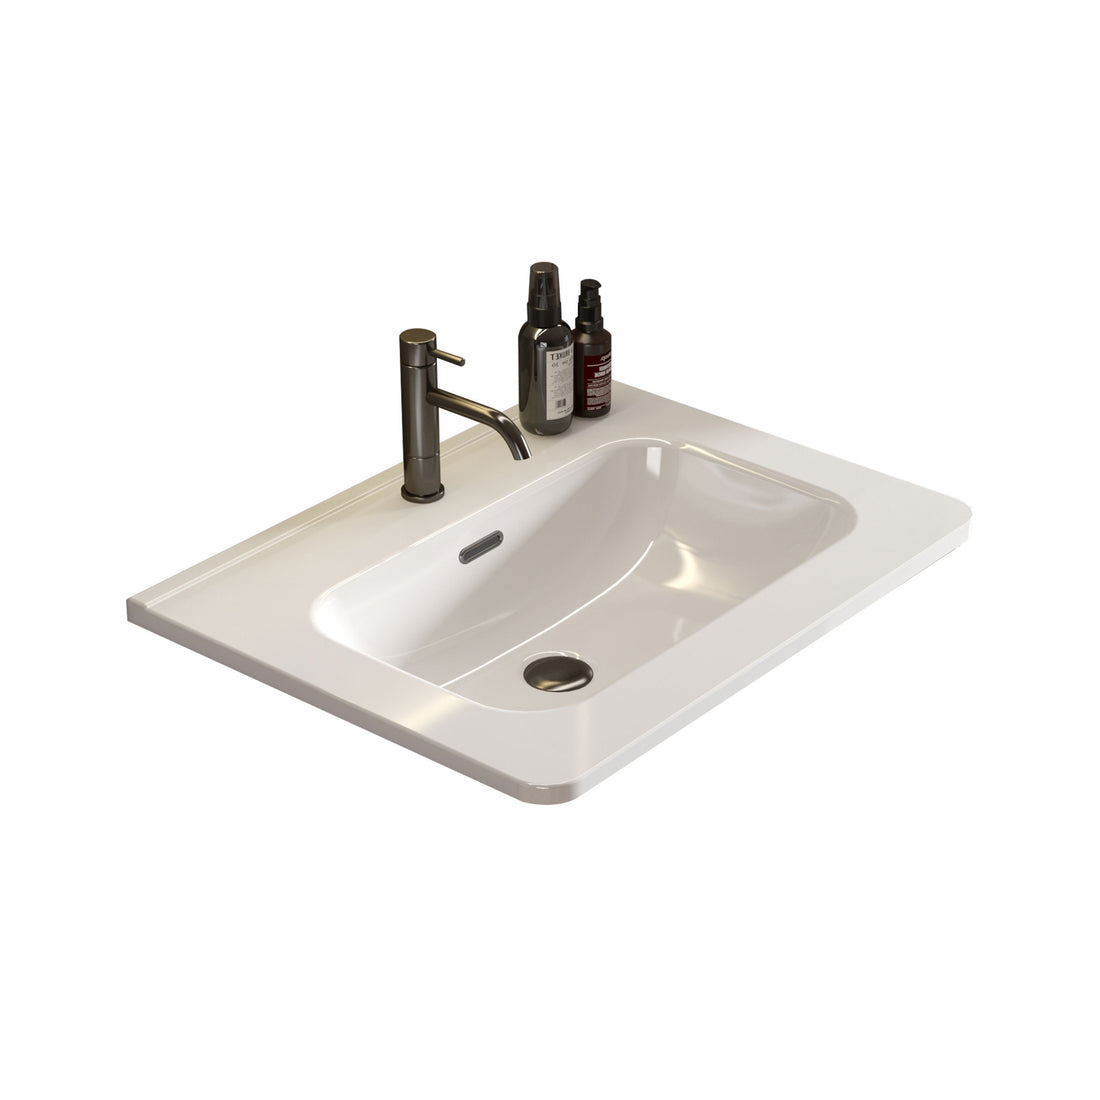 Bb0424Y301, Integrated Glossy White Ceramic Basin